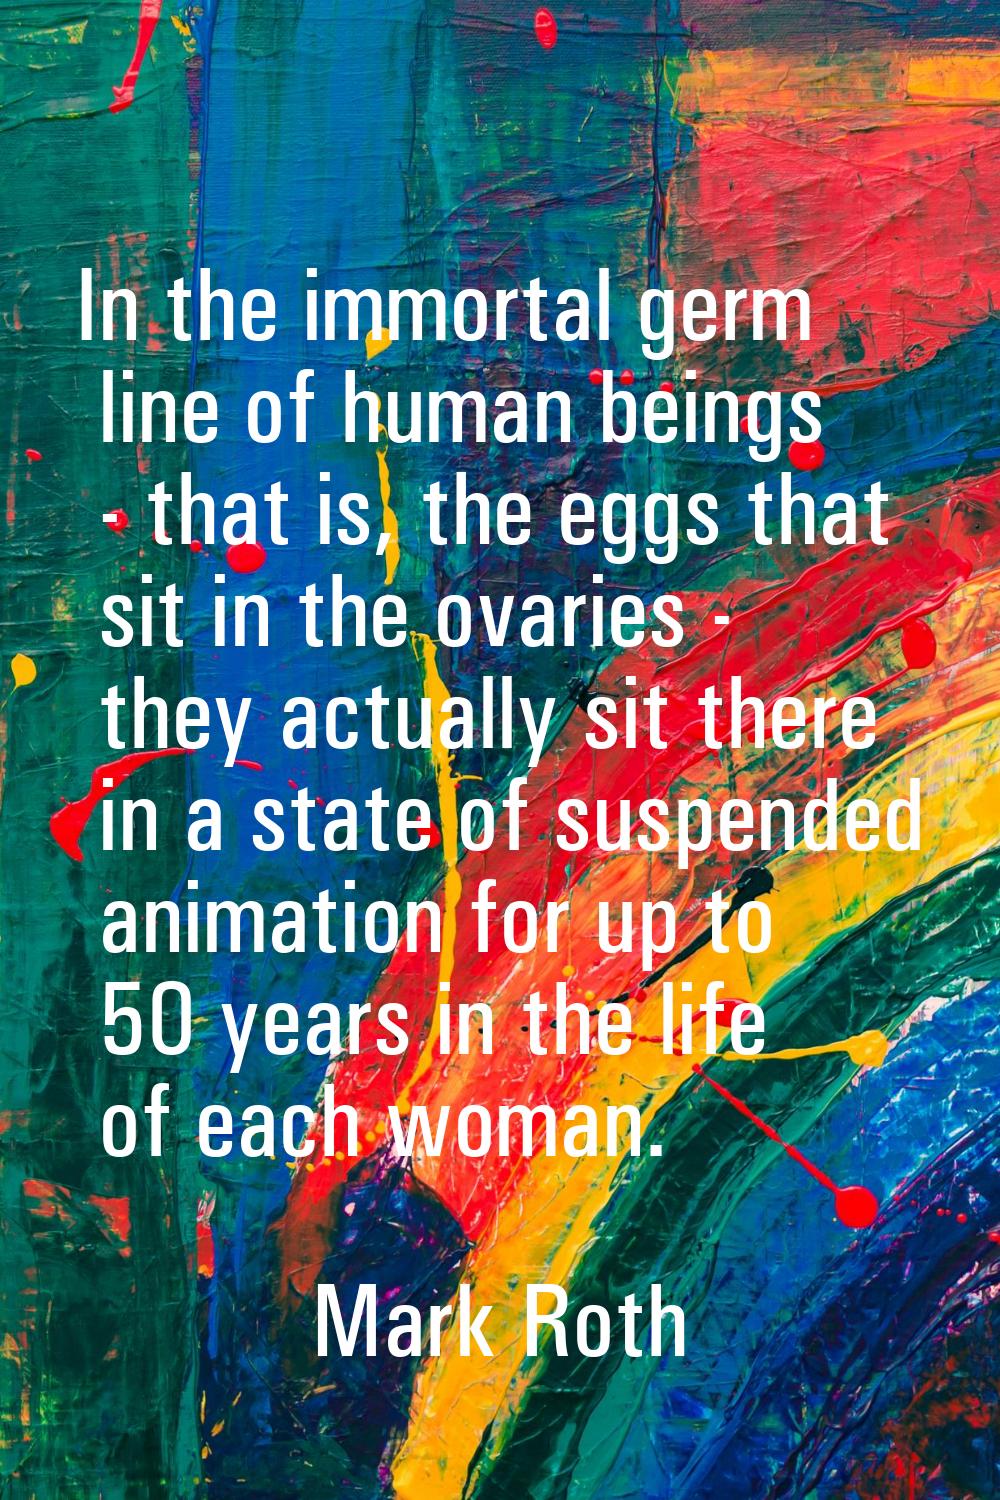 In the immortal germ line of human beings - that is, the eggs that sit in the ovaries - they actual